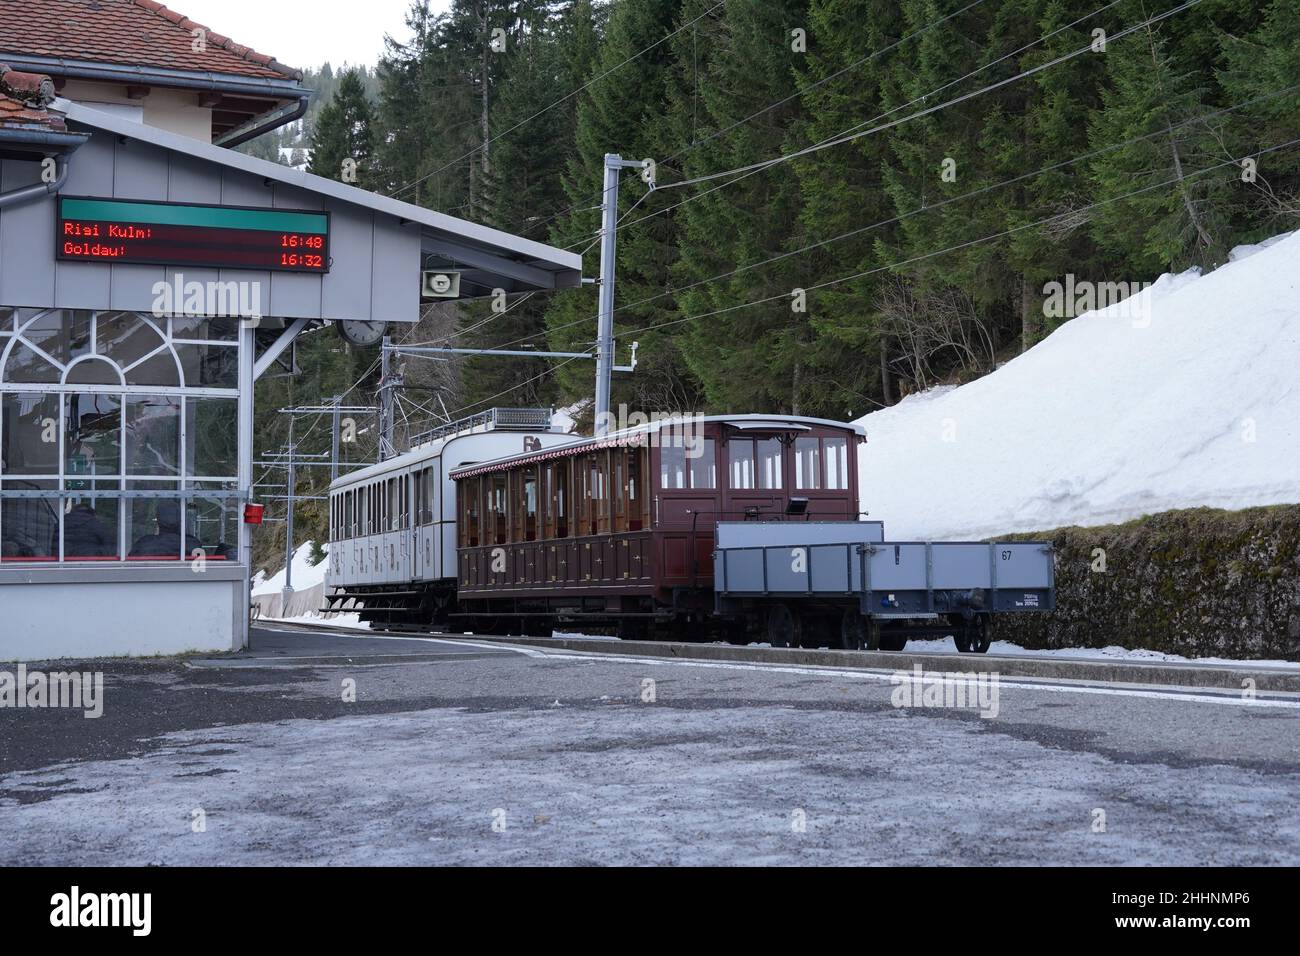 Railway station for cogwheel train in Rigi Kaltbad surrounded by forest. Stock Photo